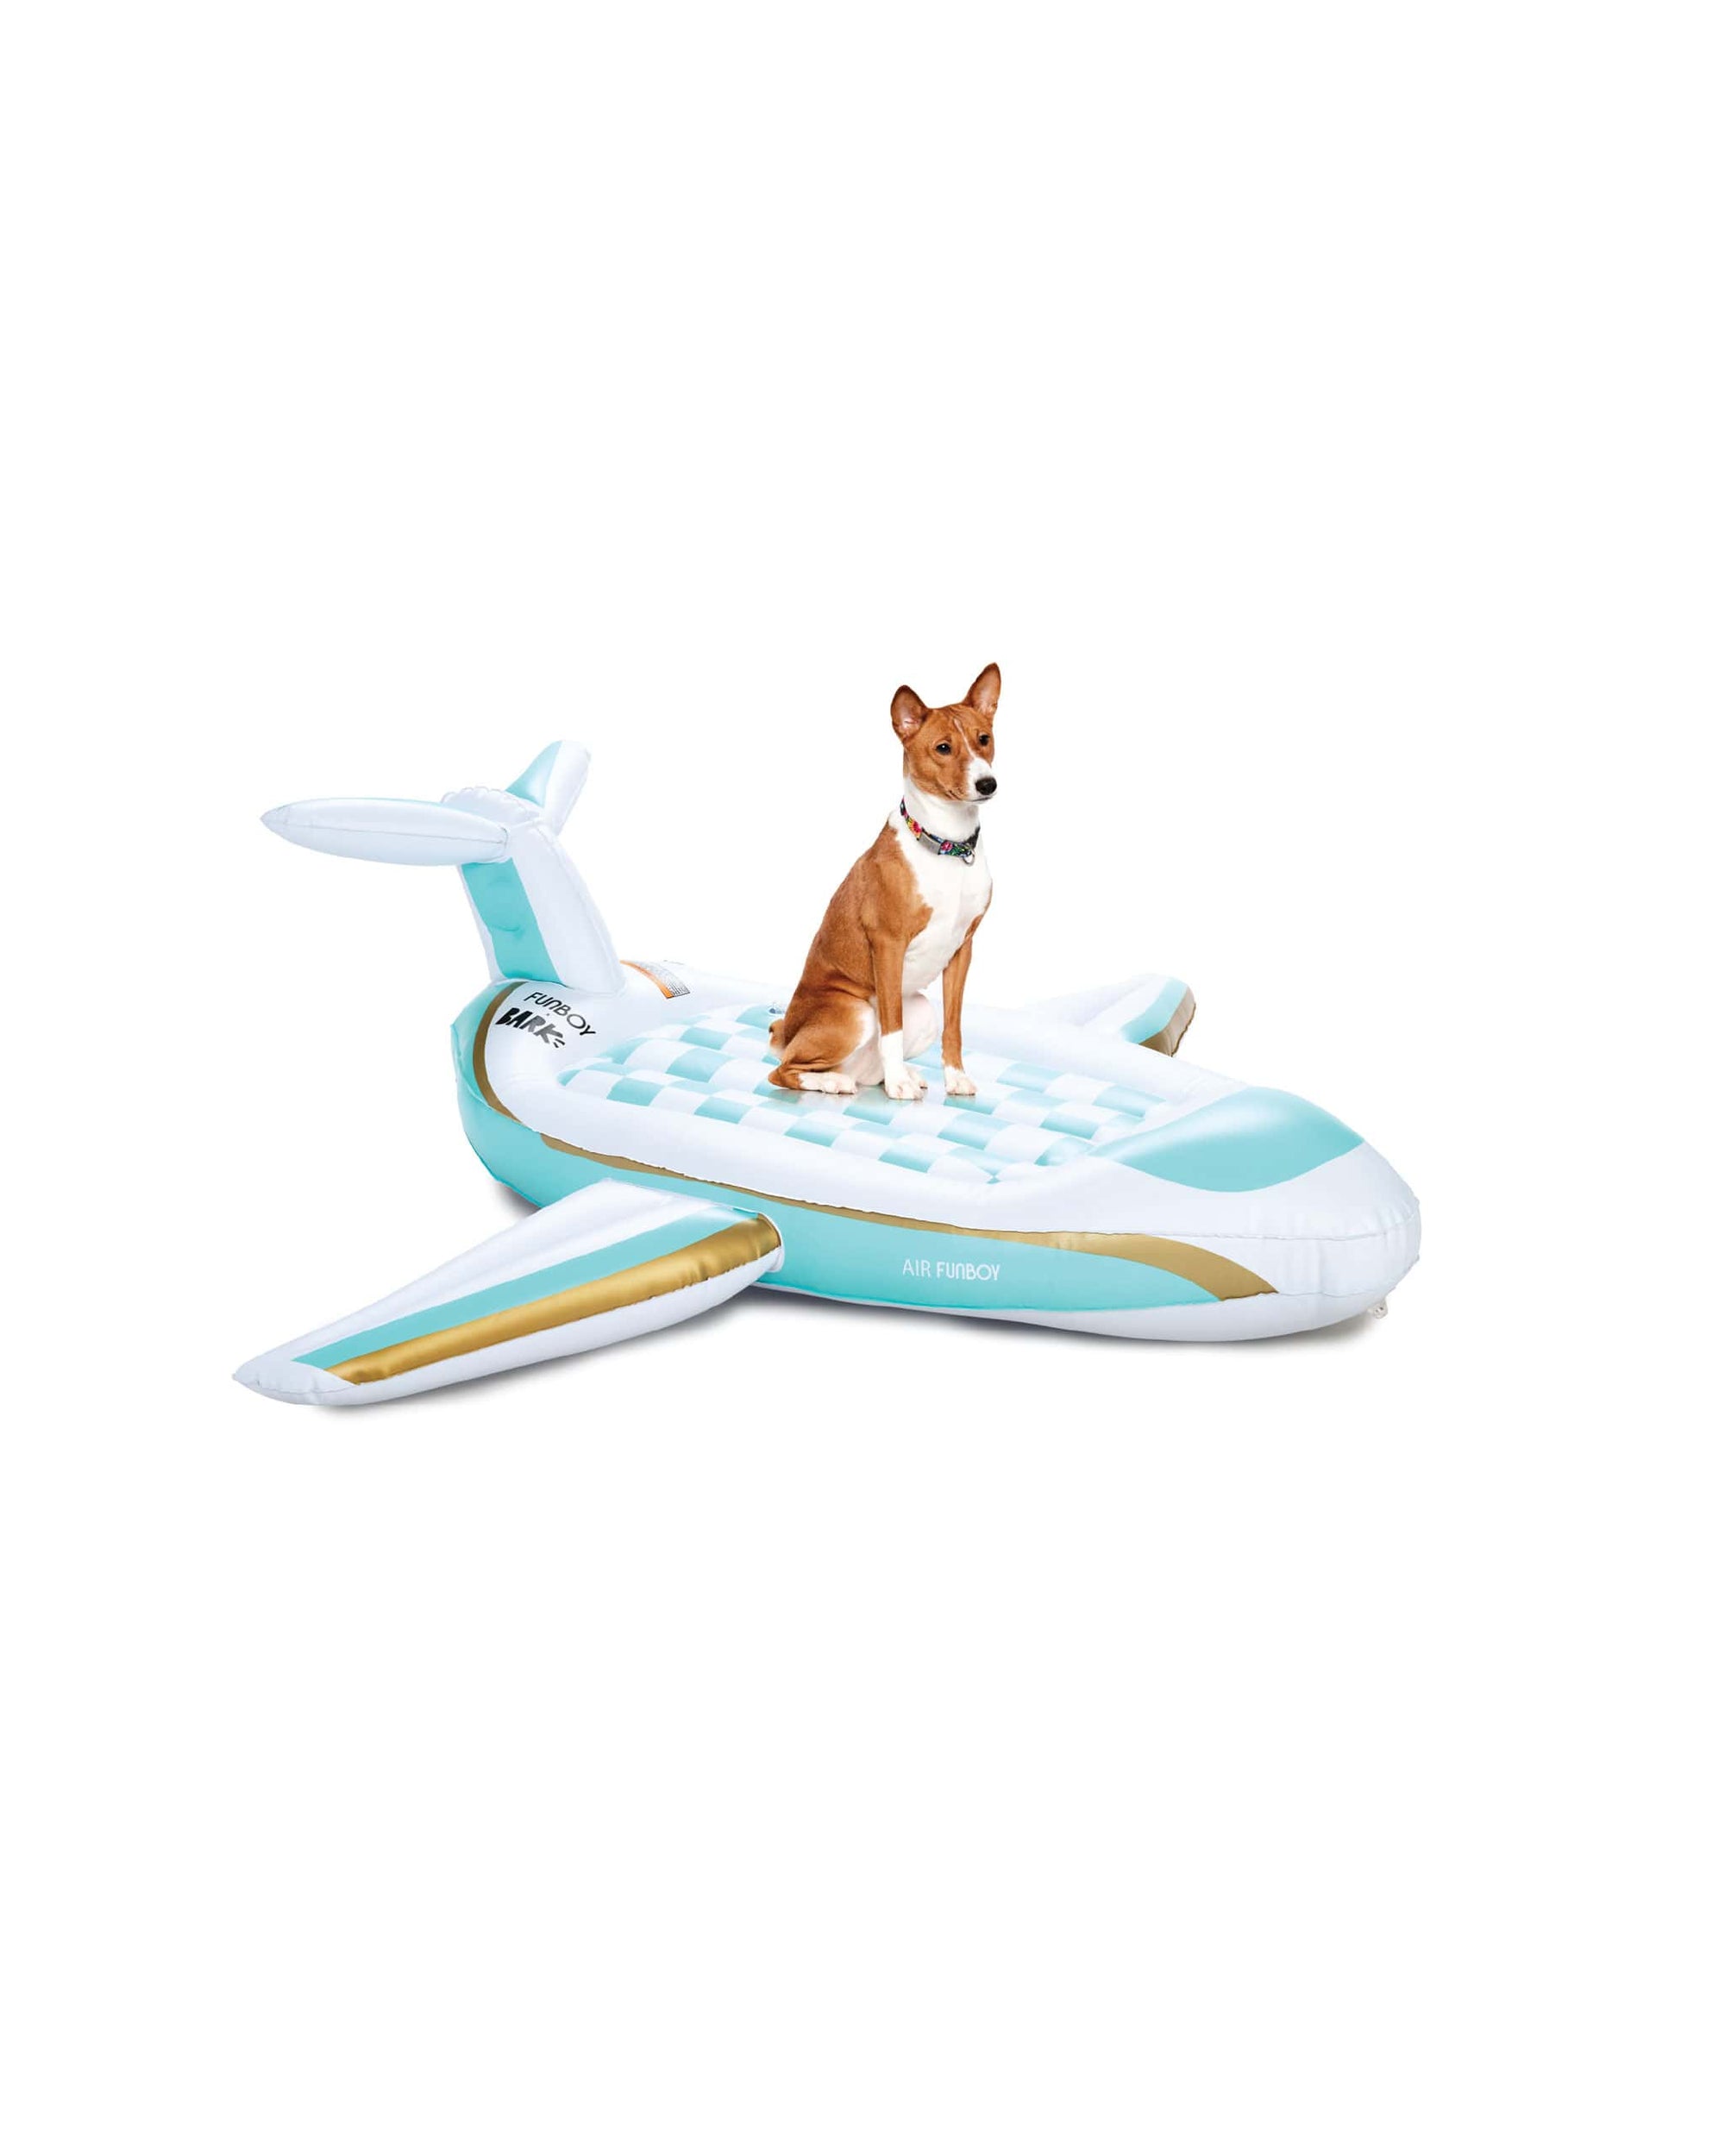 Inflatable Pool Floats for Dogs